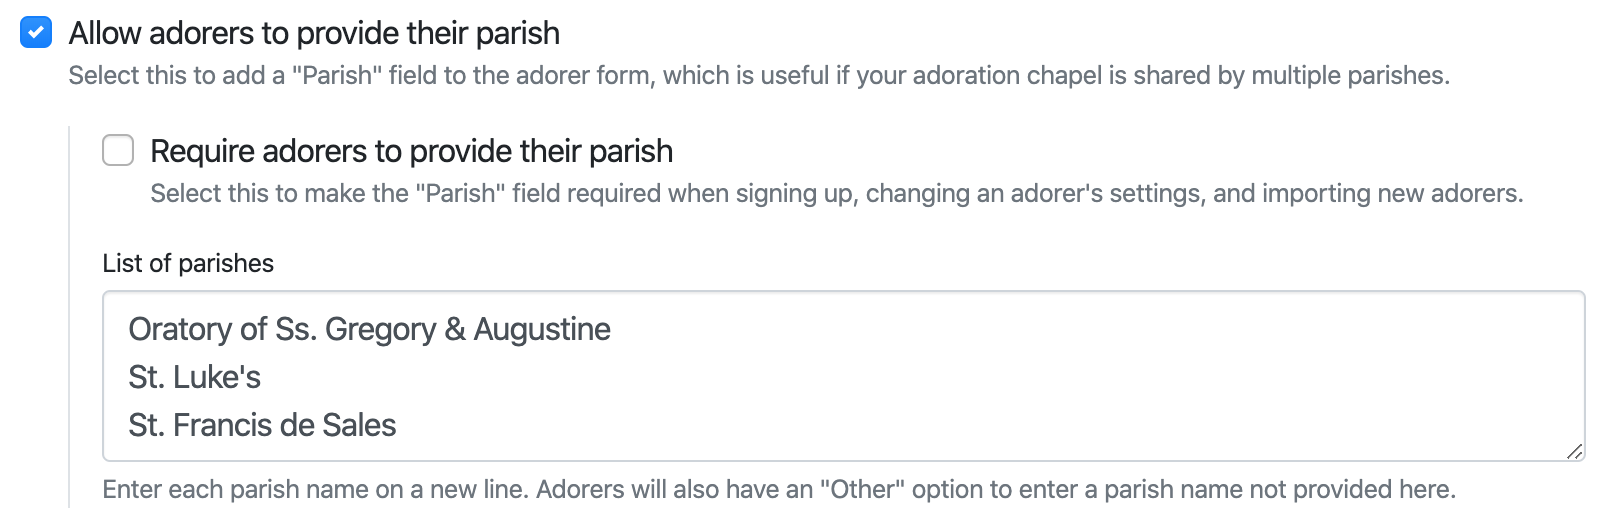 Enable the Parish Field feature